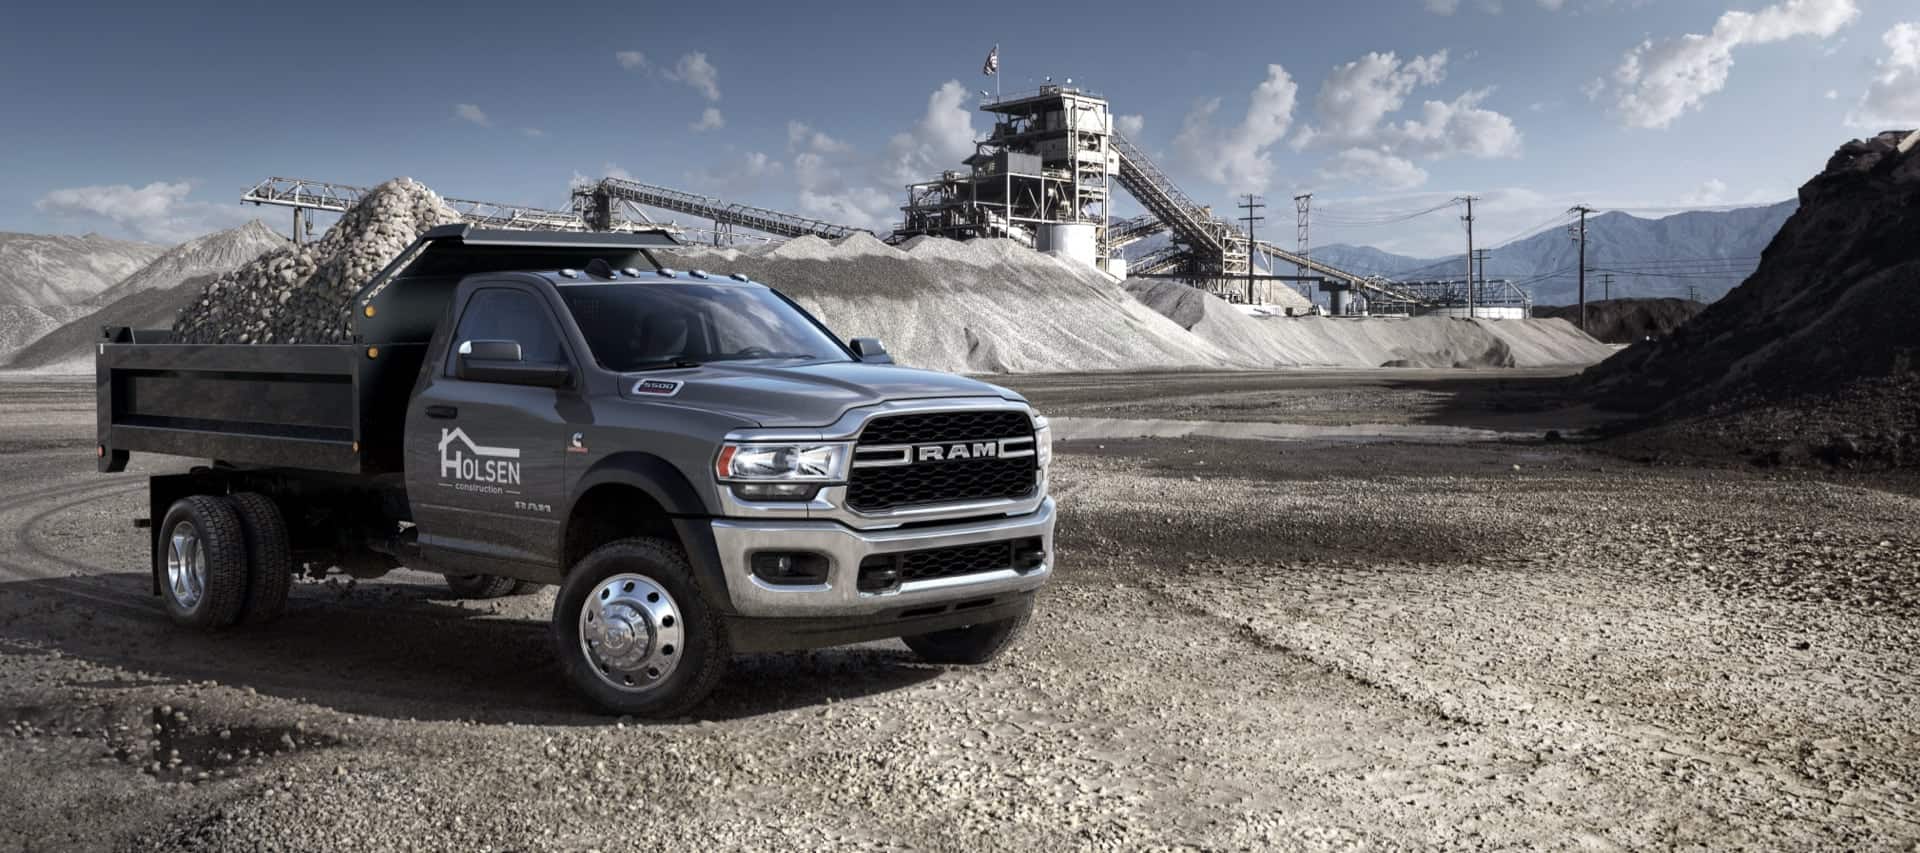 The 2021 Ram 5500 Chassis Cab with a truck bed upfit allowing it to carry a large pile of gravel.